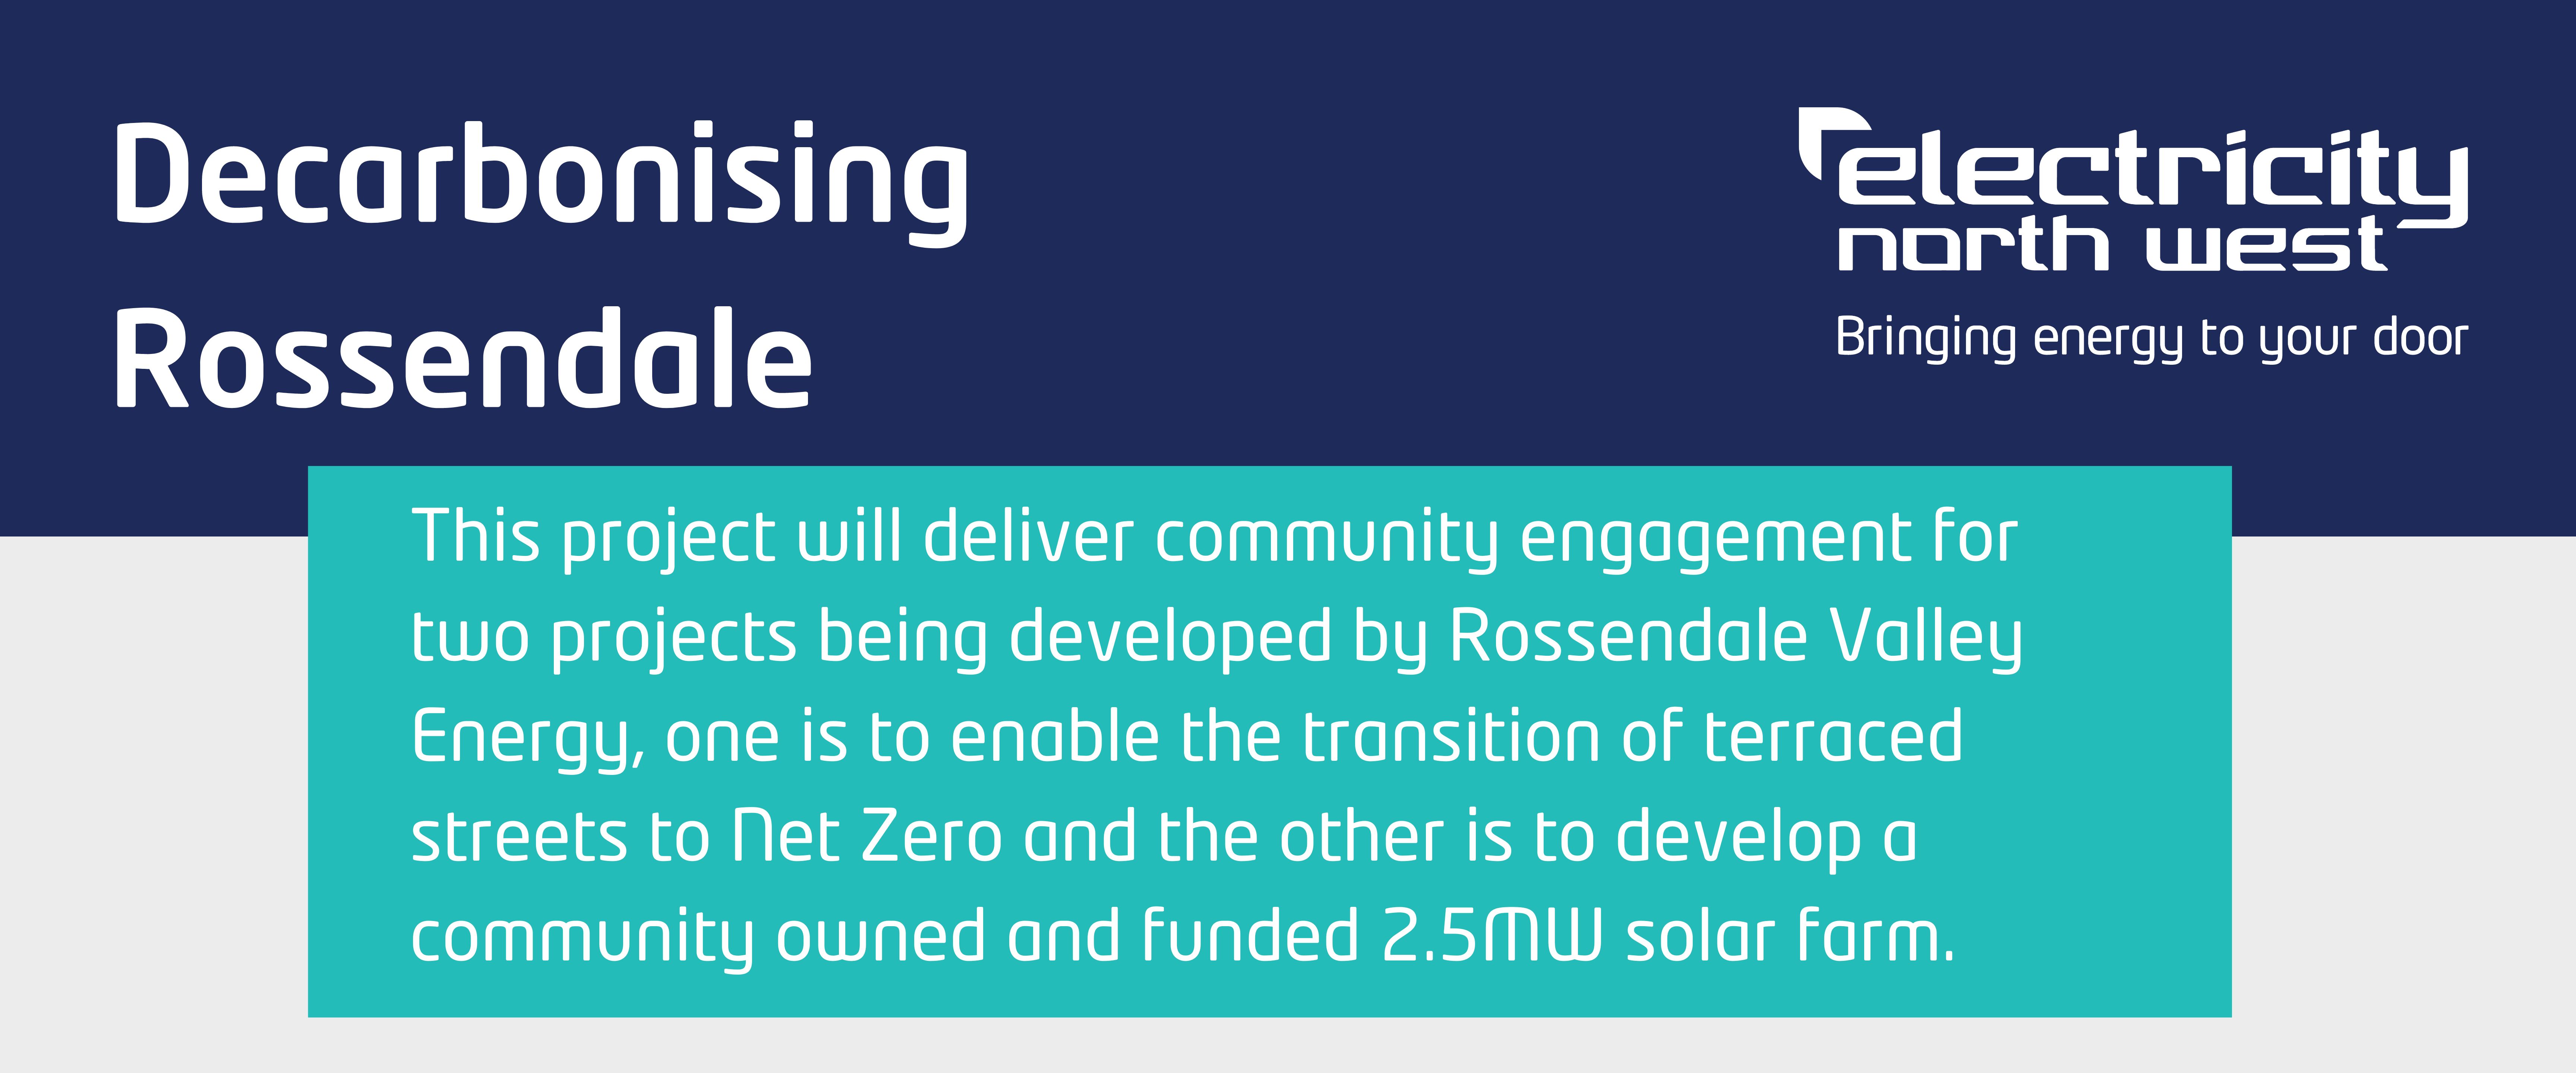 Decarbonising Rossendale, This project will deliver community engagement for two projects being developed by Rossendale Valley Energy, one is to enable the transition of terraced streets to Net Zero and the other is to develop a community owned and funded 2.5MW solar farm.